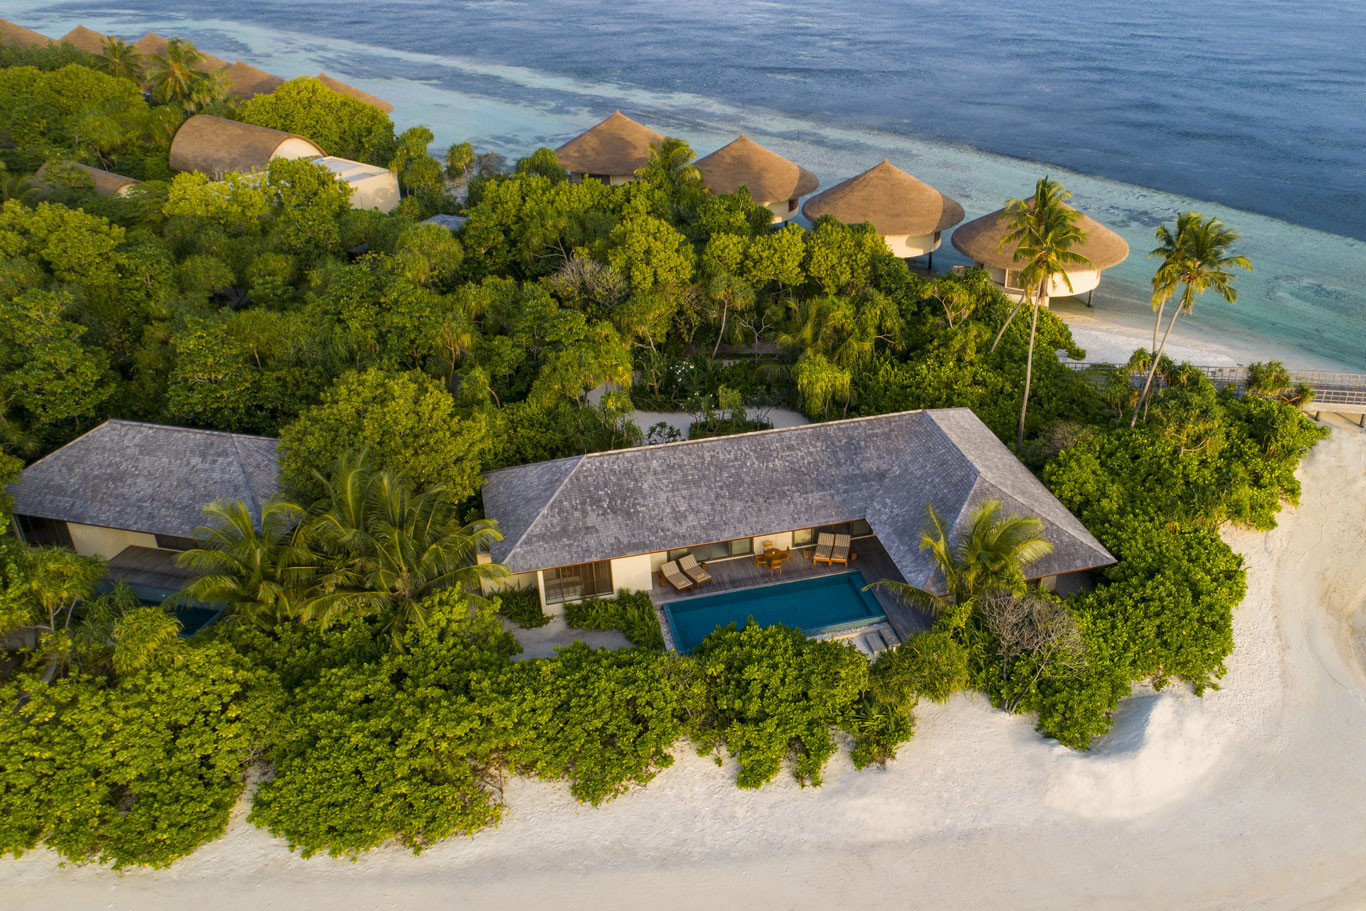 The Stuff of Travel Daydreams - The Residence Maldives Dhigurah